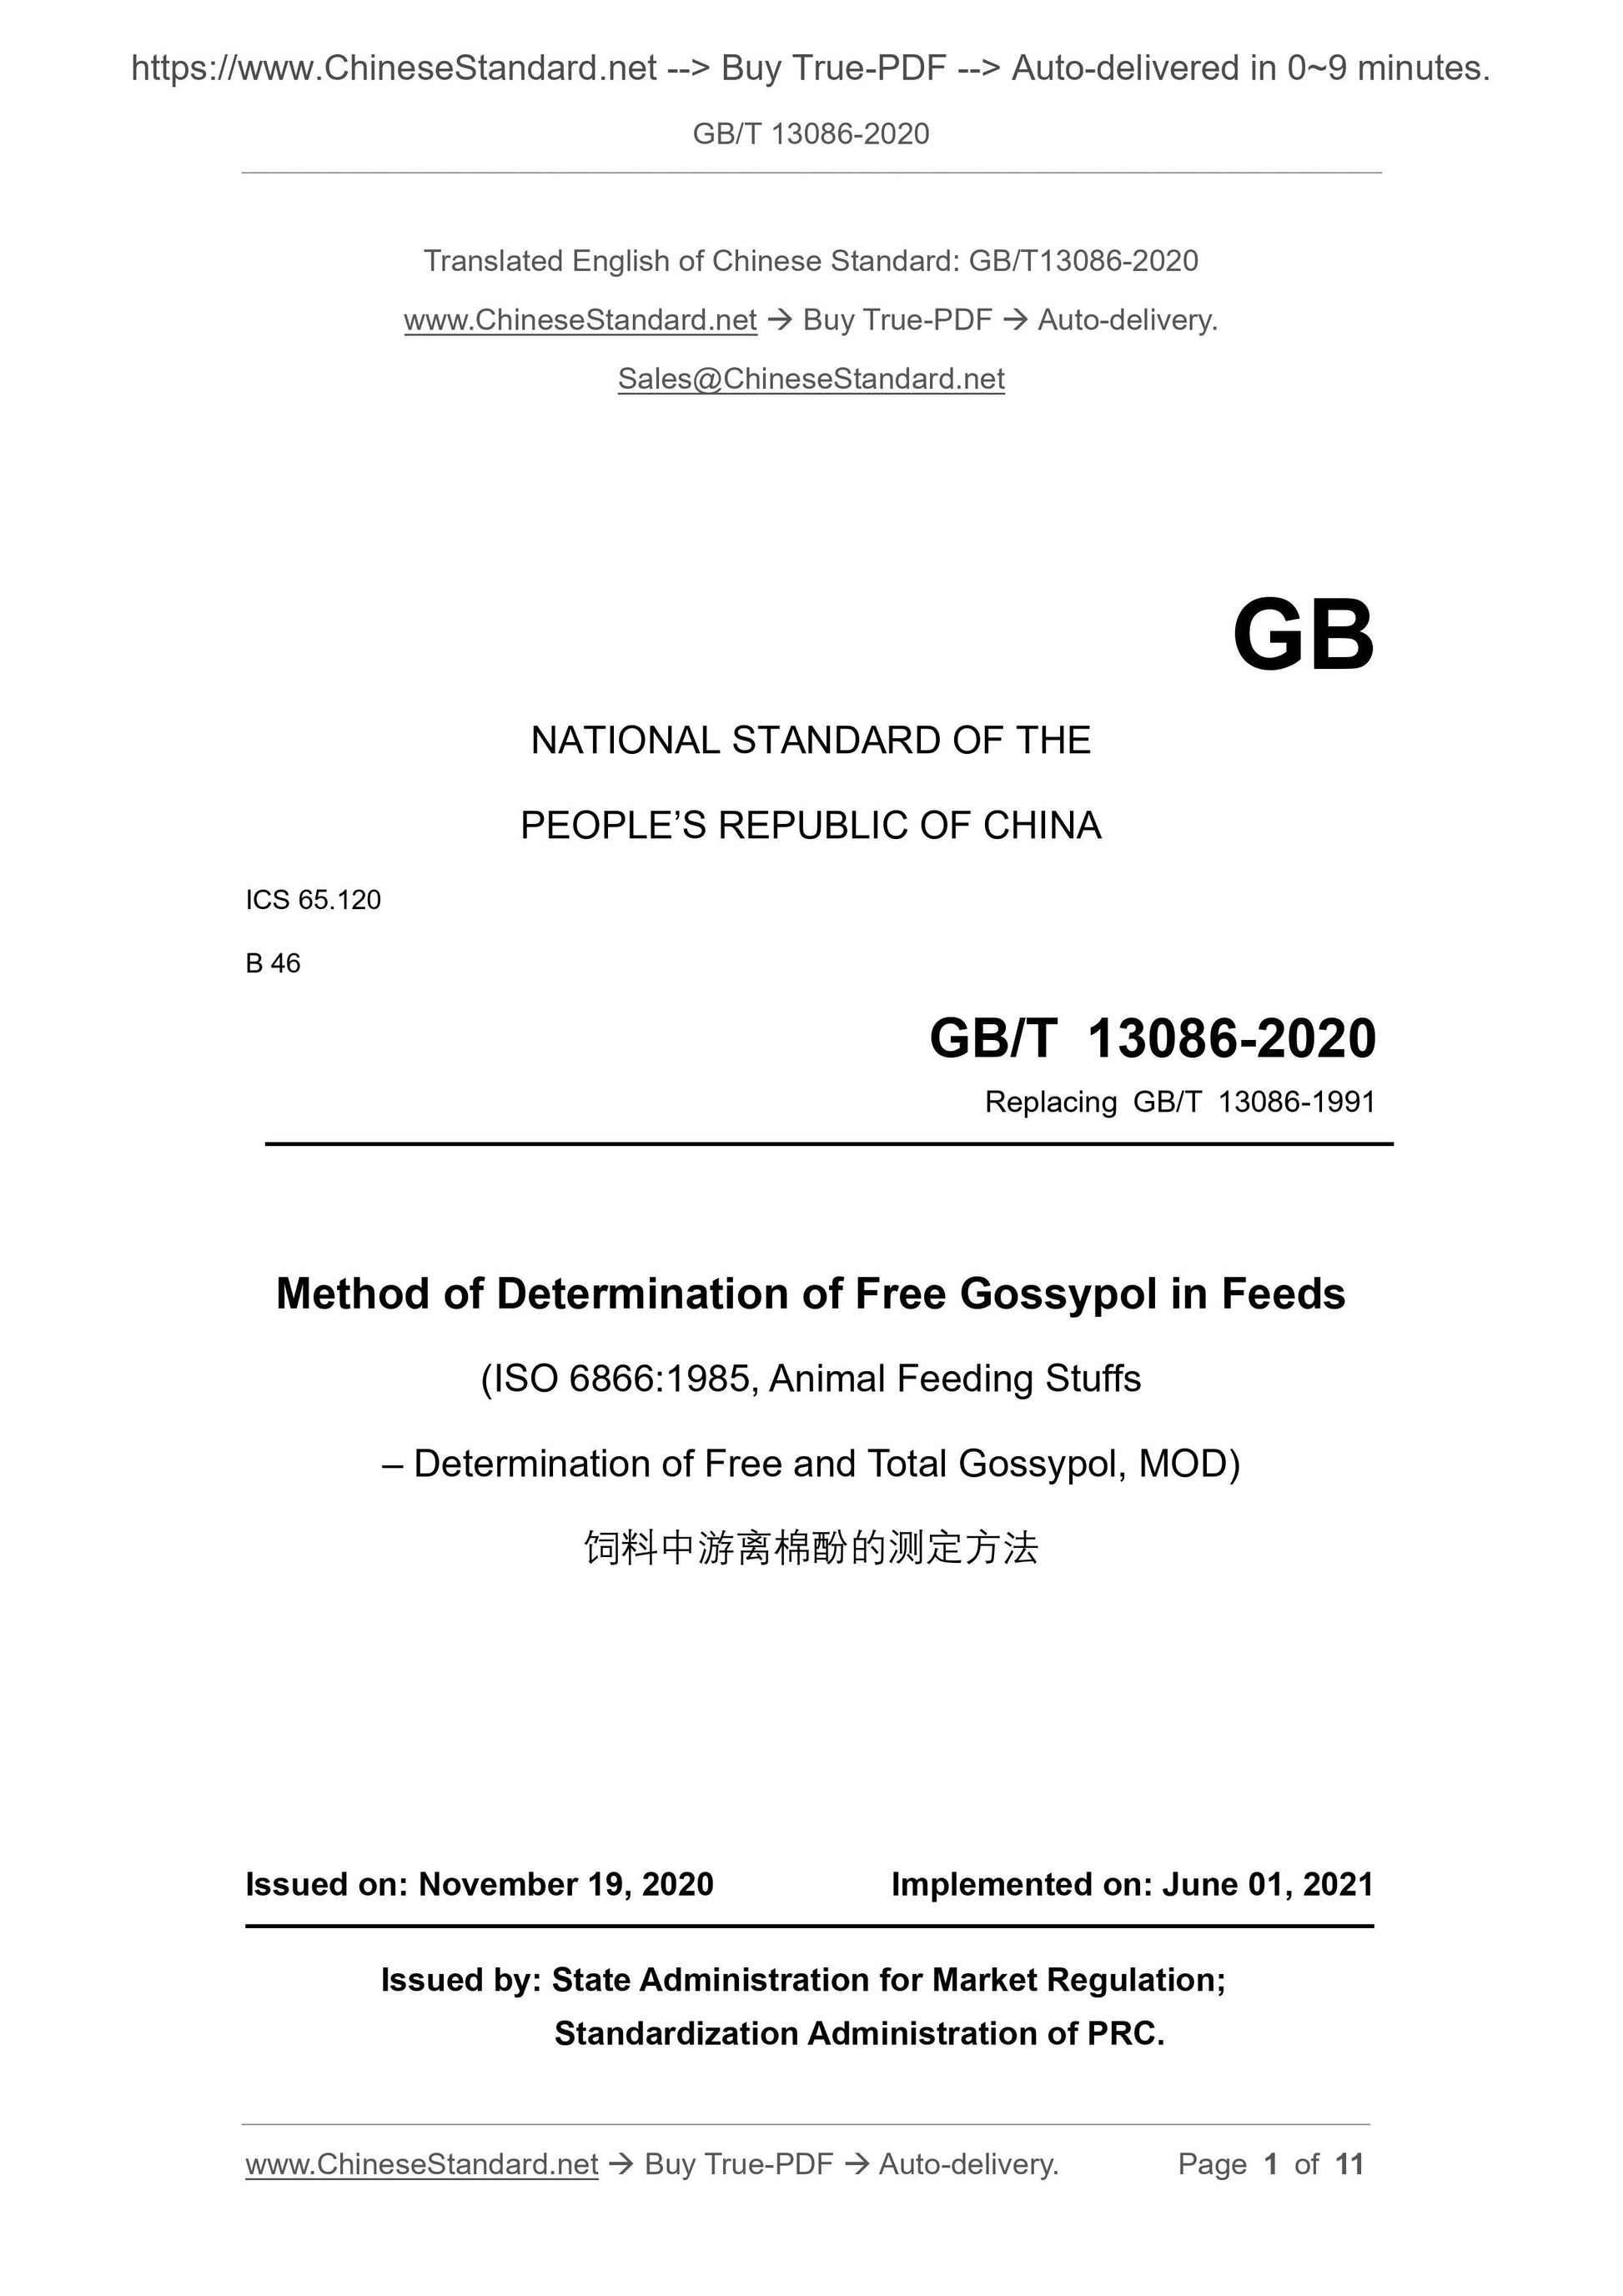 GB/T 13086-2020 Page 1